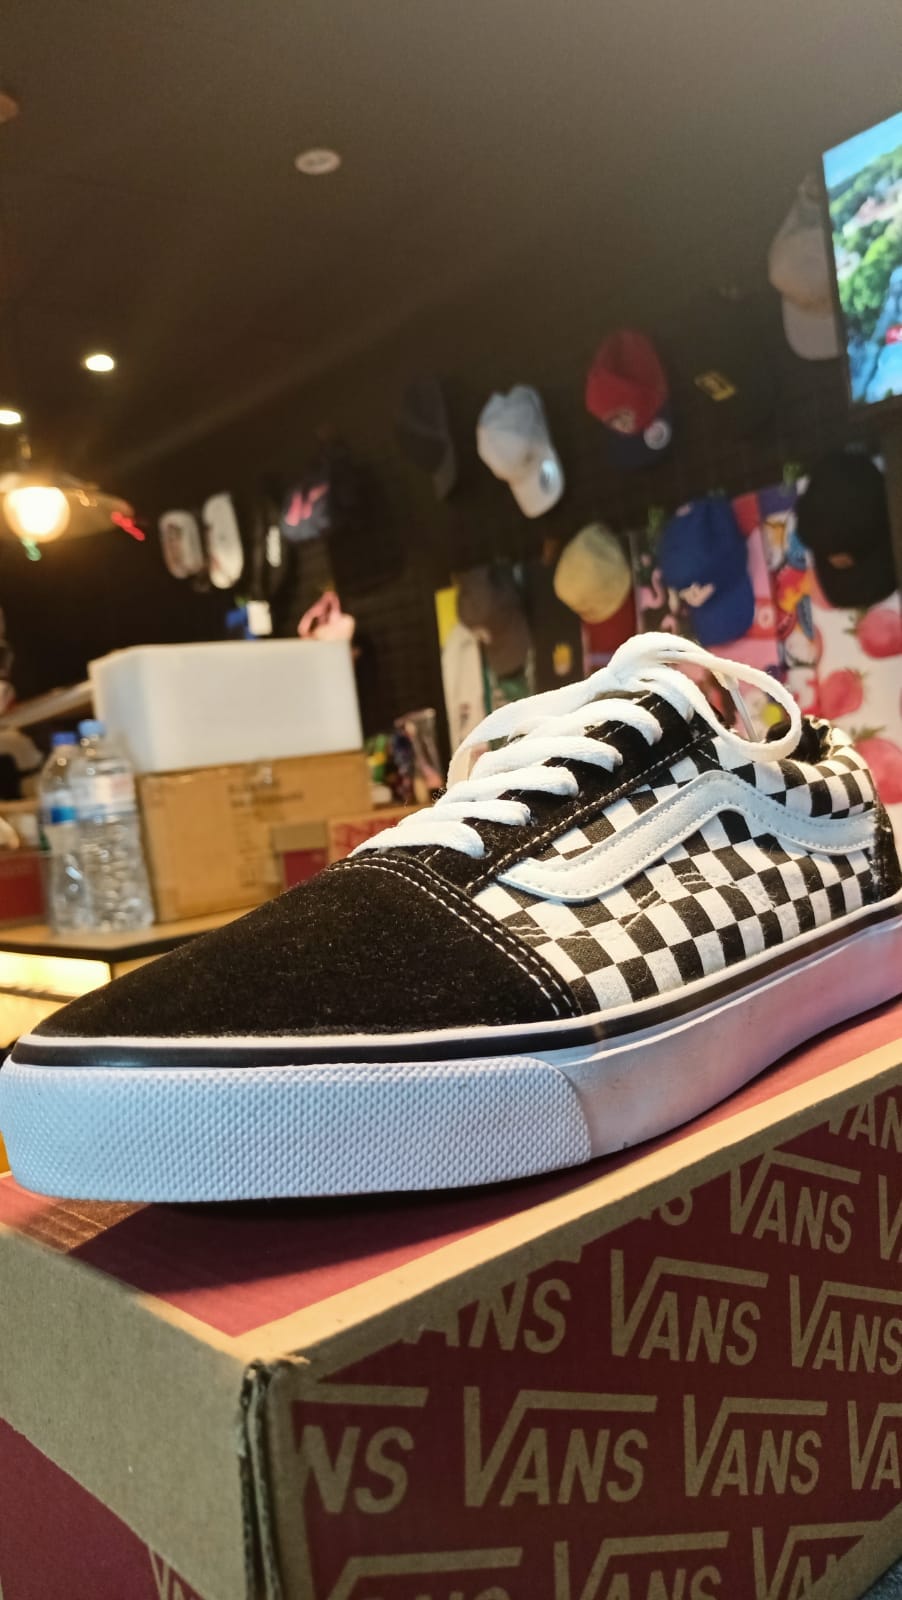 When it comes to design, the Vans shoe has a sleek and modern look.